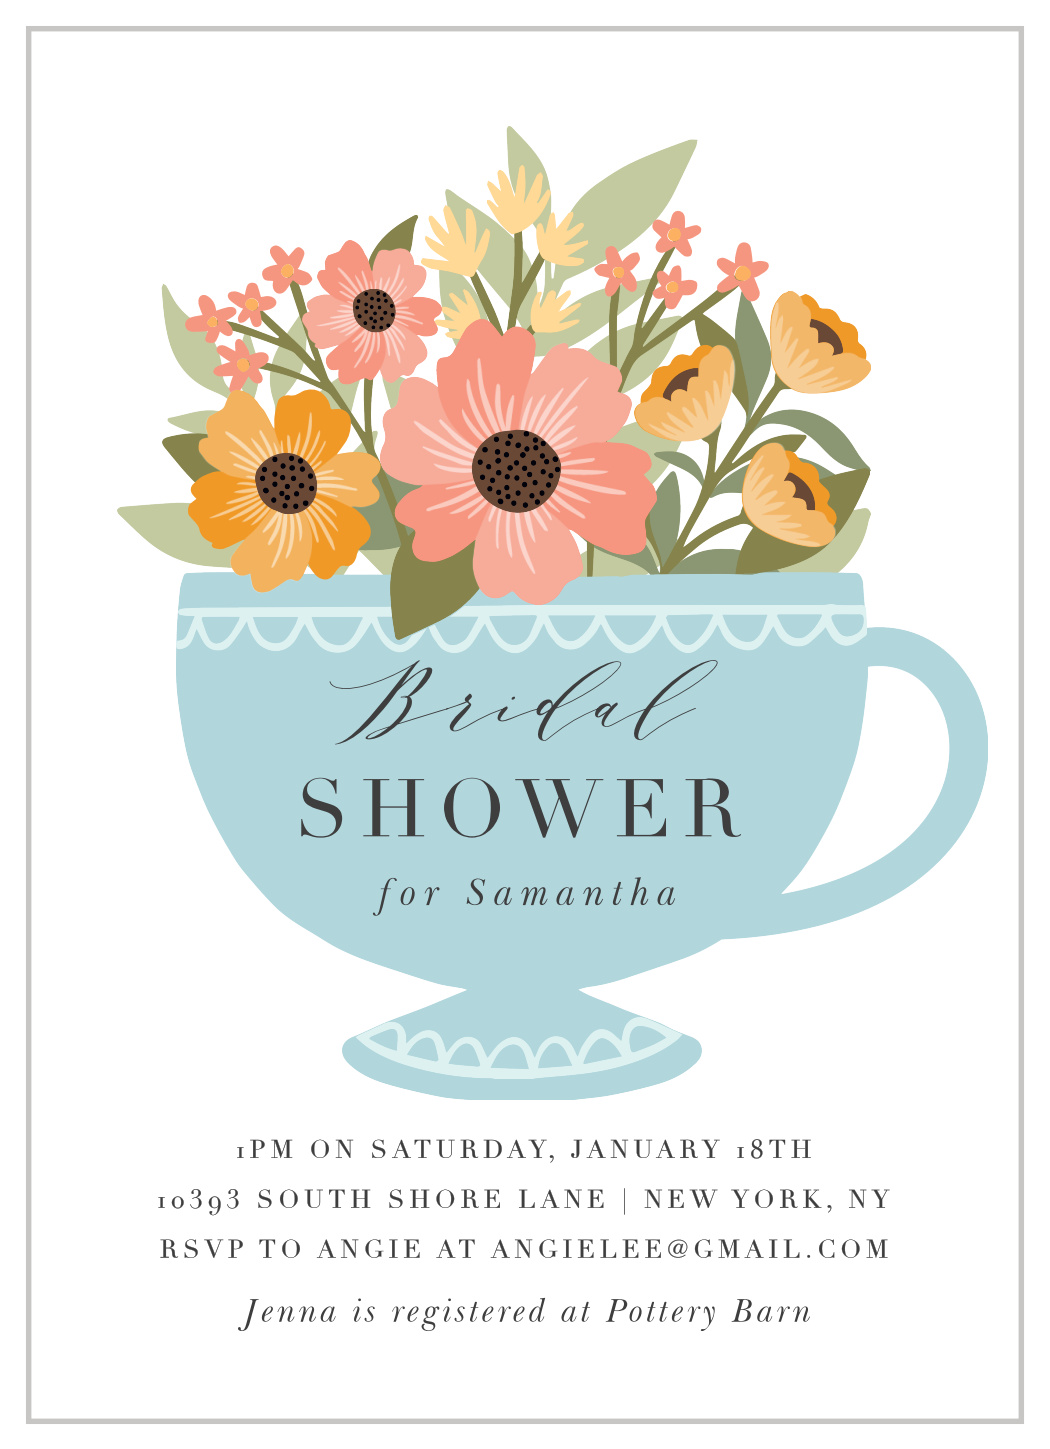 Tea Party Bridal Shower Invitations by Basic Invite